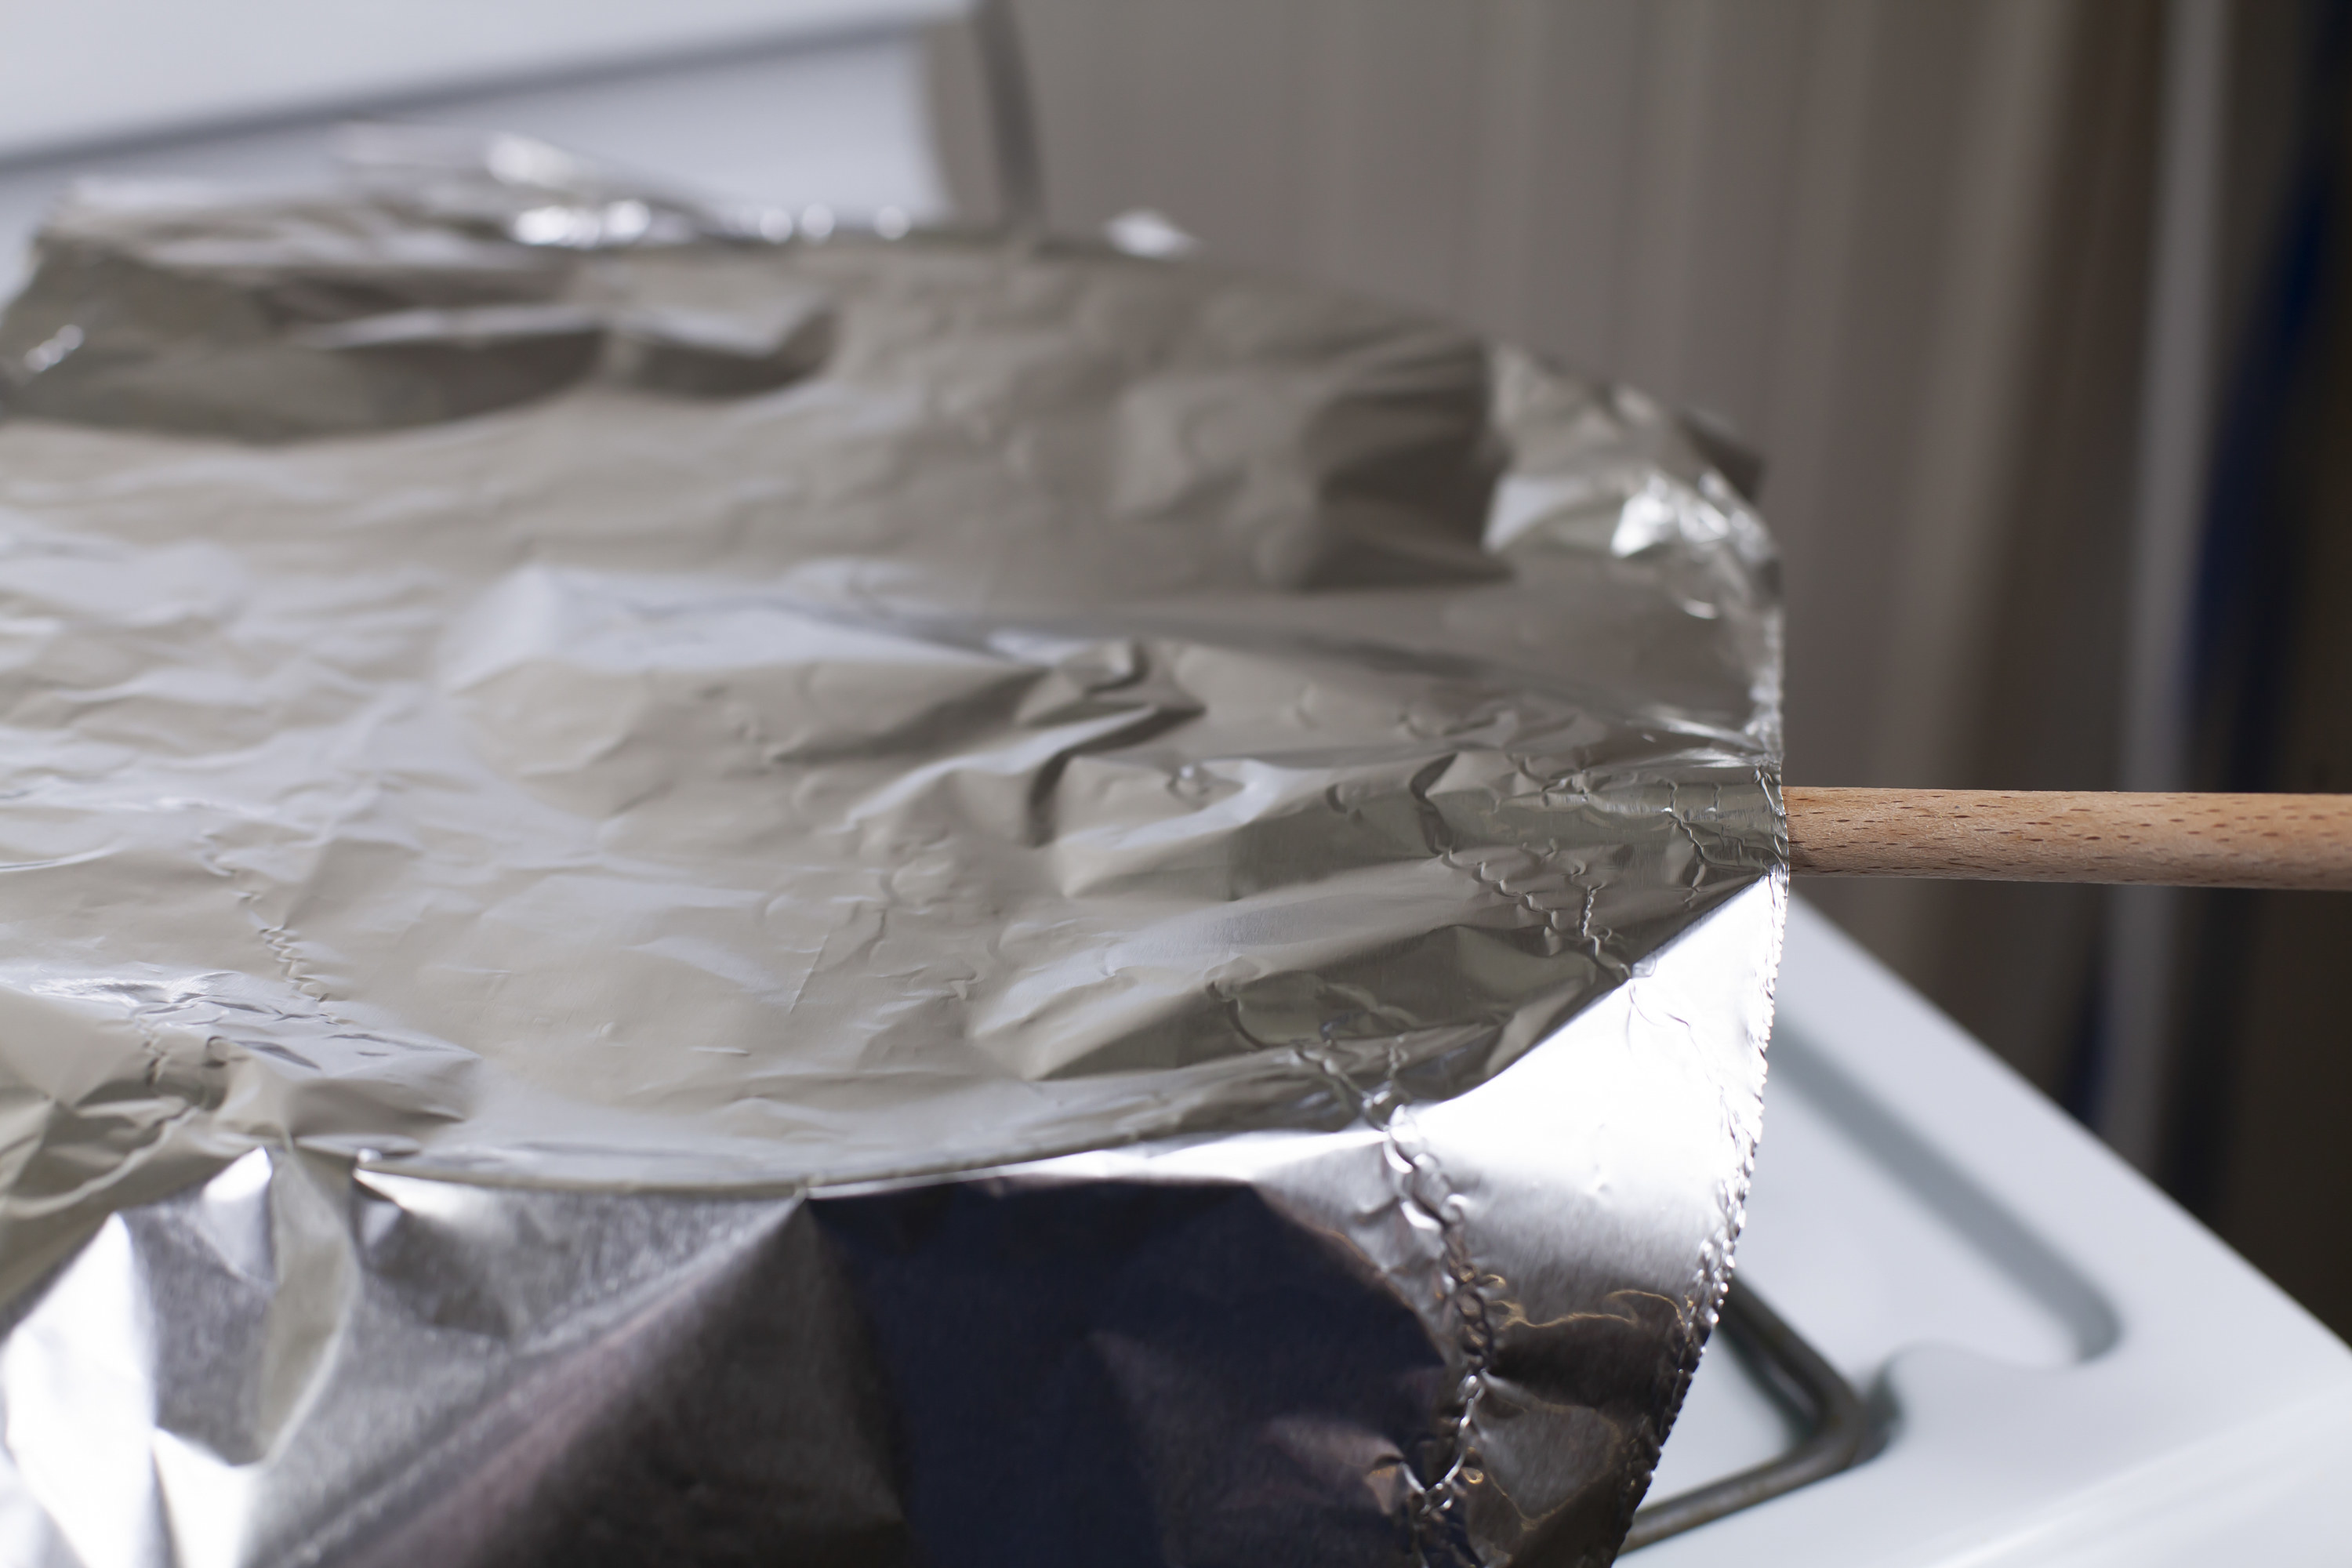 A pot on the stove with a wooden spoon in it and covered with foil